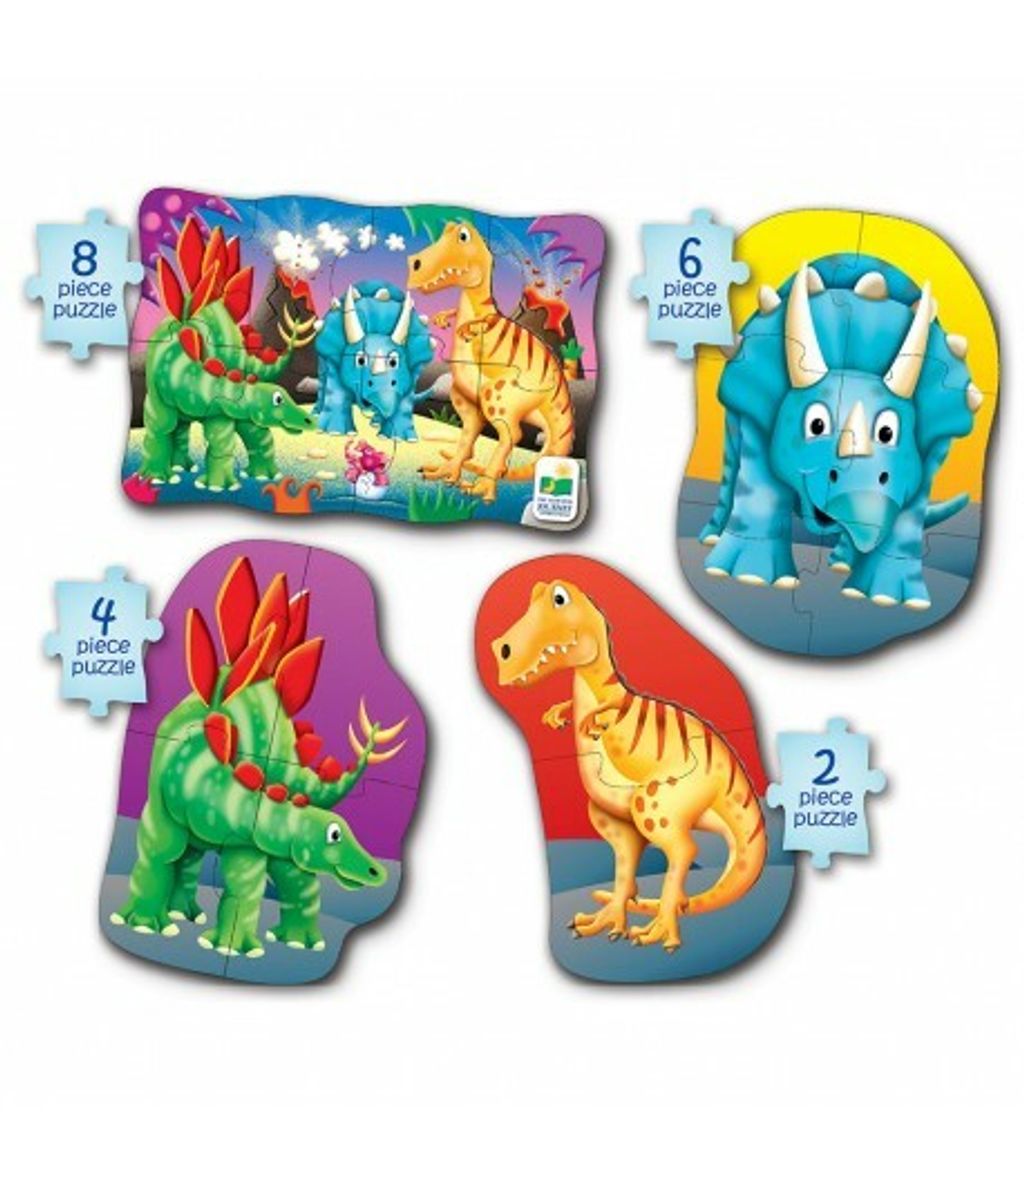 my-first-puzzle-sets-4-in-a-box-puzzles-dino.jpg